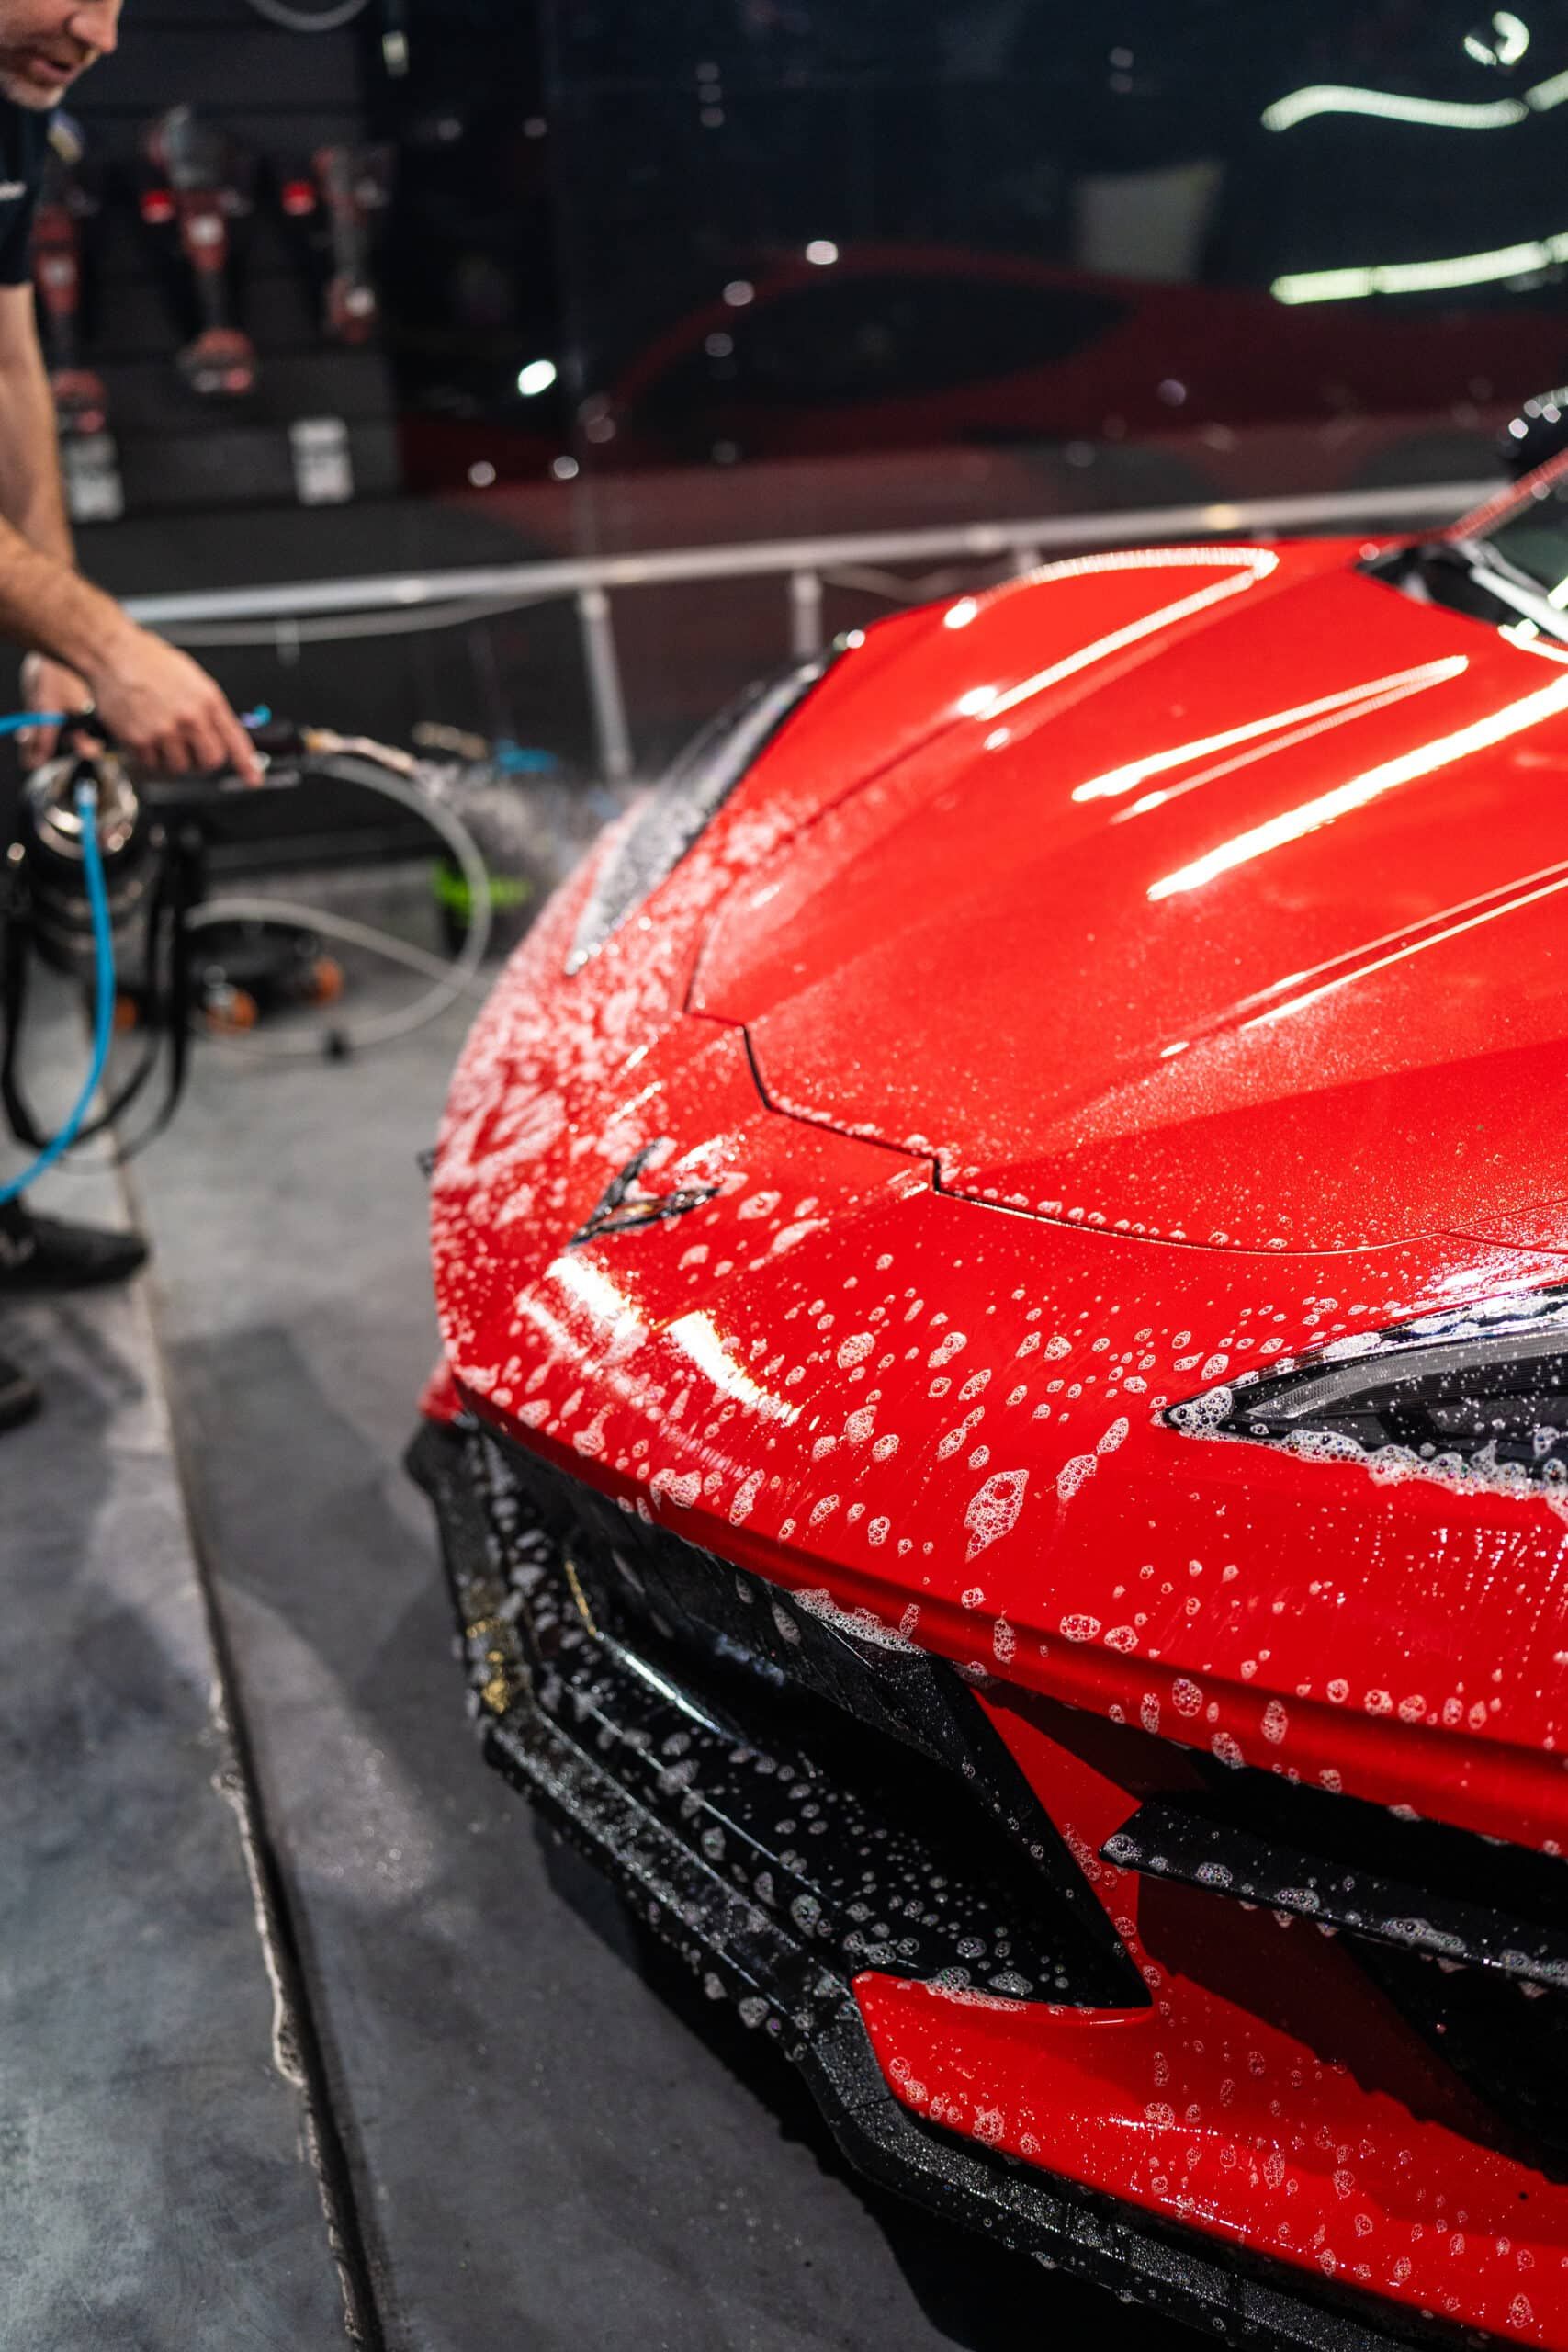 A man is washing a red sports car with a hose.